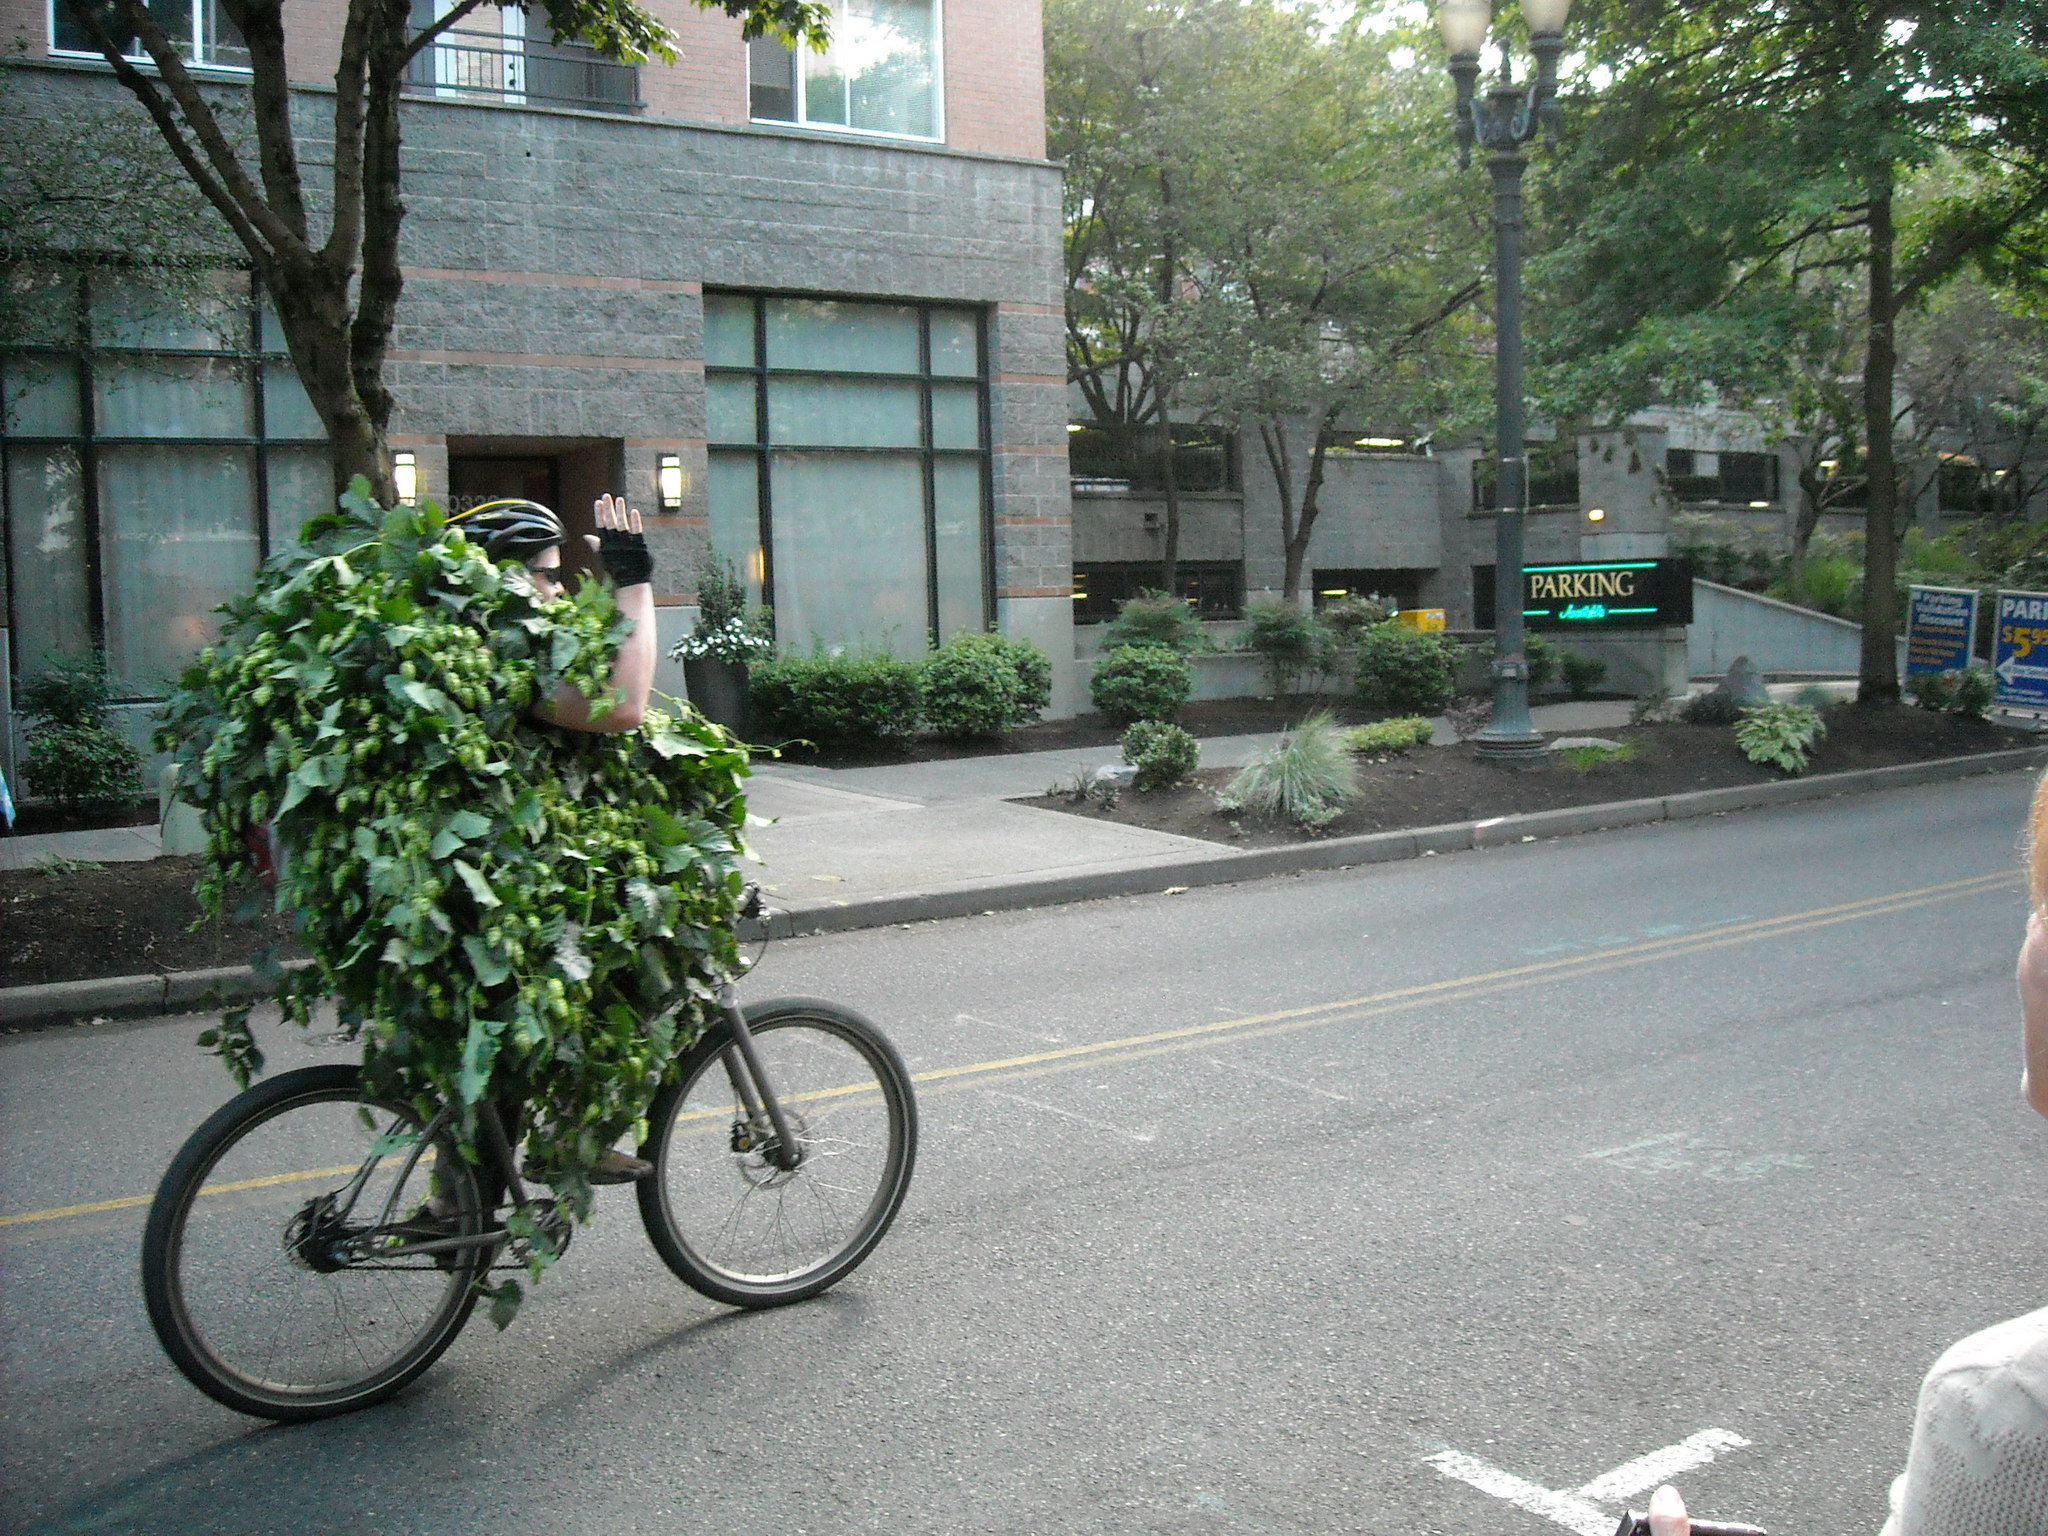 Apex Jesse personified the spirit of Portland during fresh hop season as he rode his hop-vine-bedecked bicycle away from one of Full Sail's late, great fresh hop tours...(FoystonFoto)